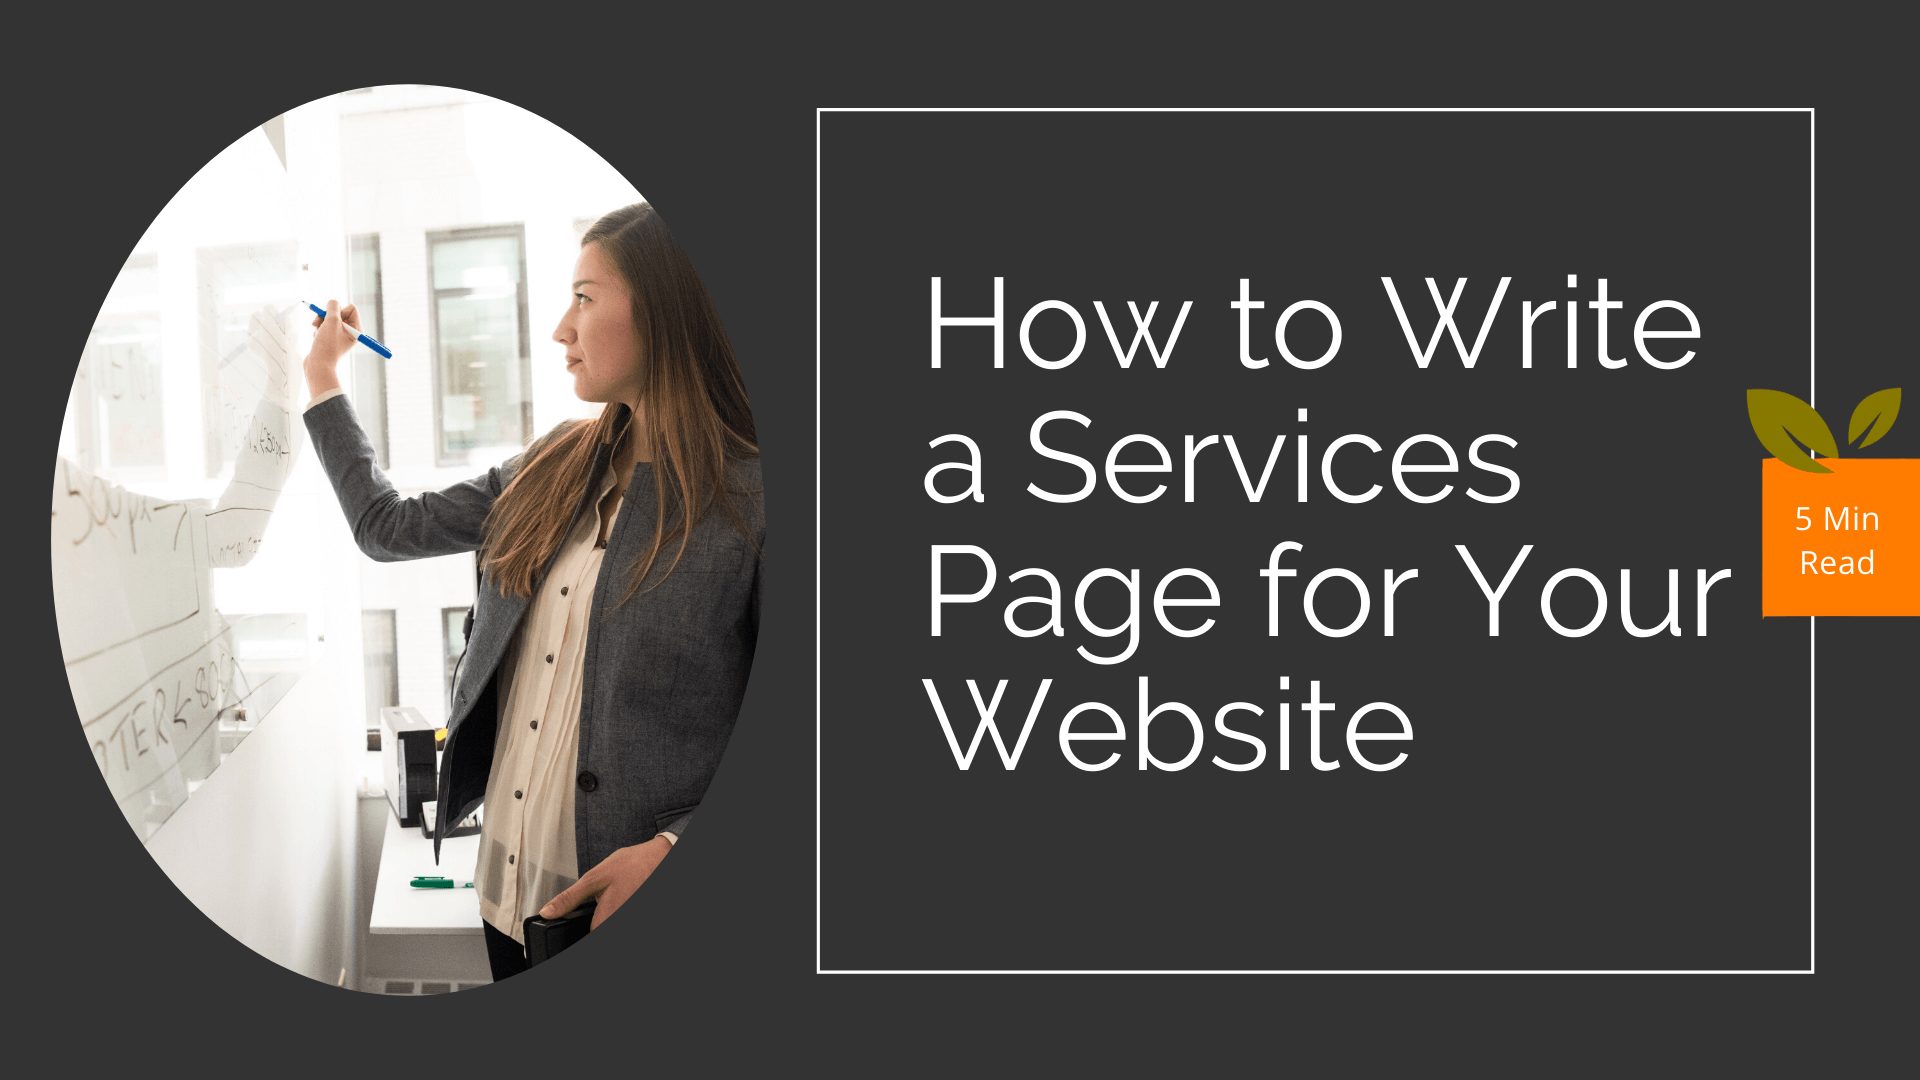 How to Write a Services Page for Your Website